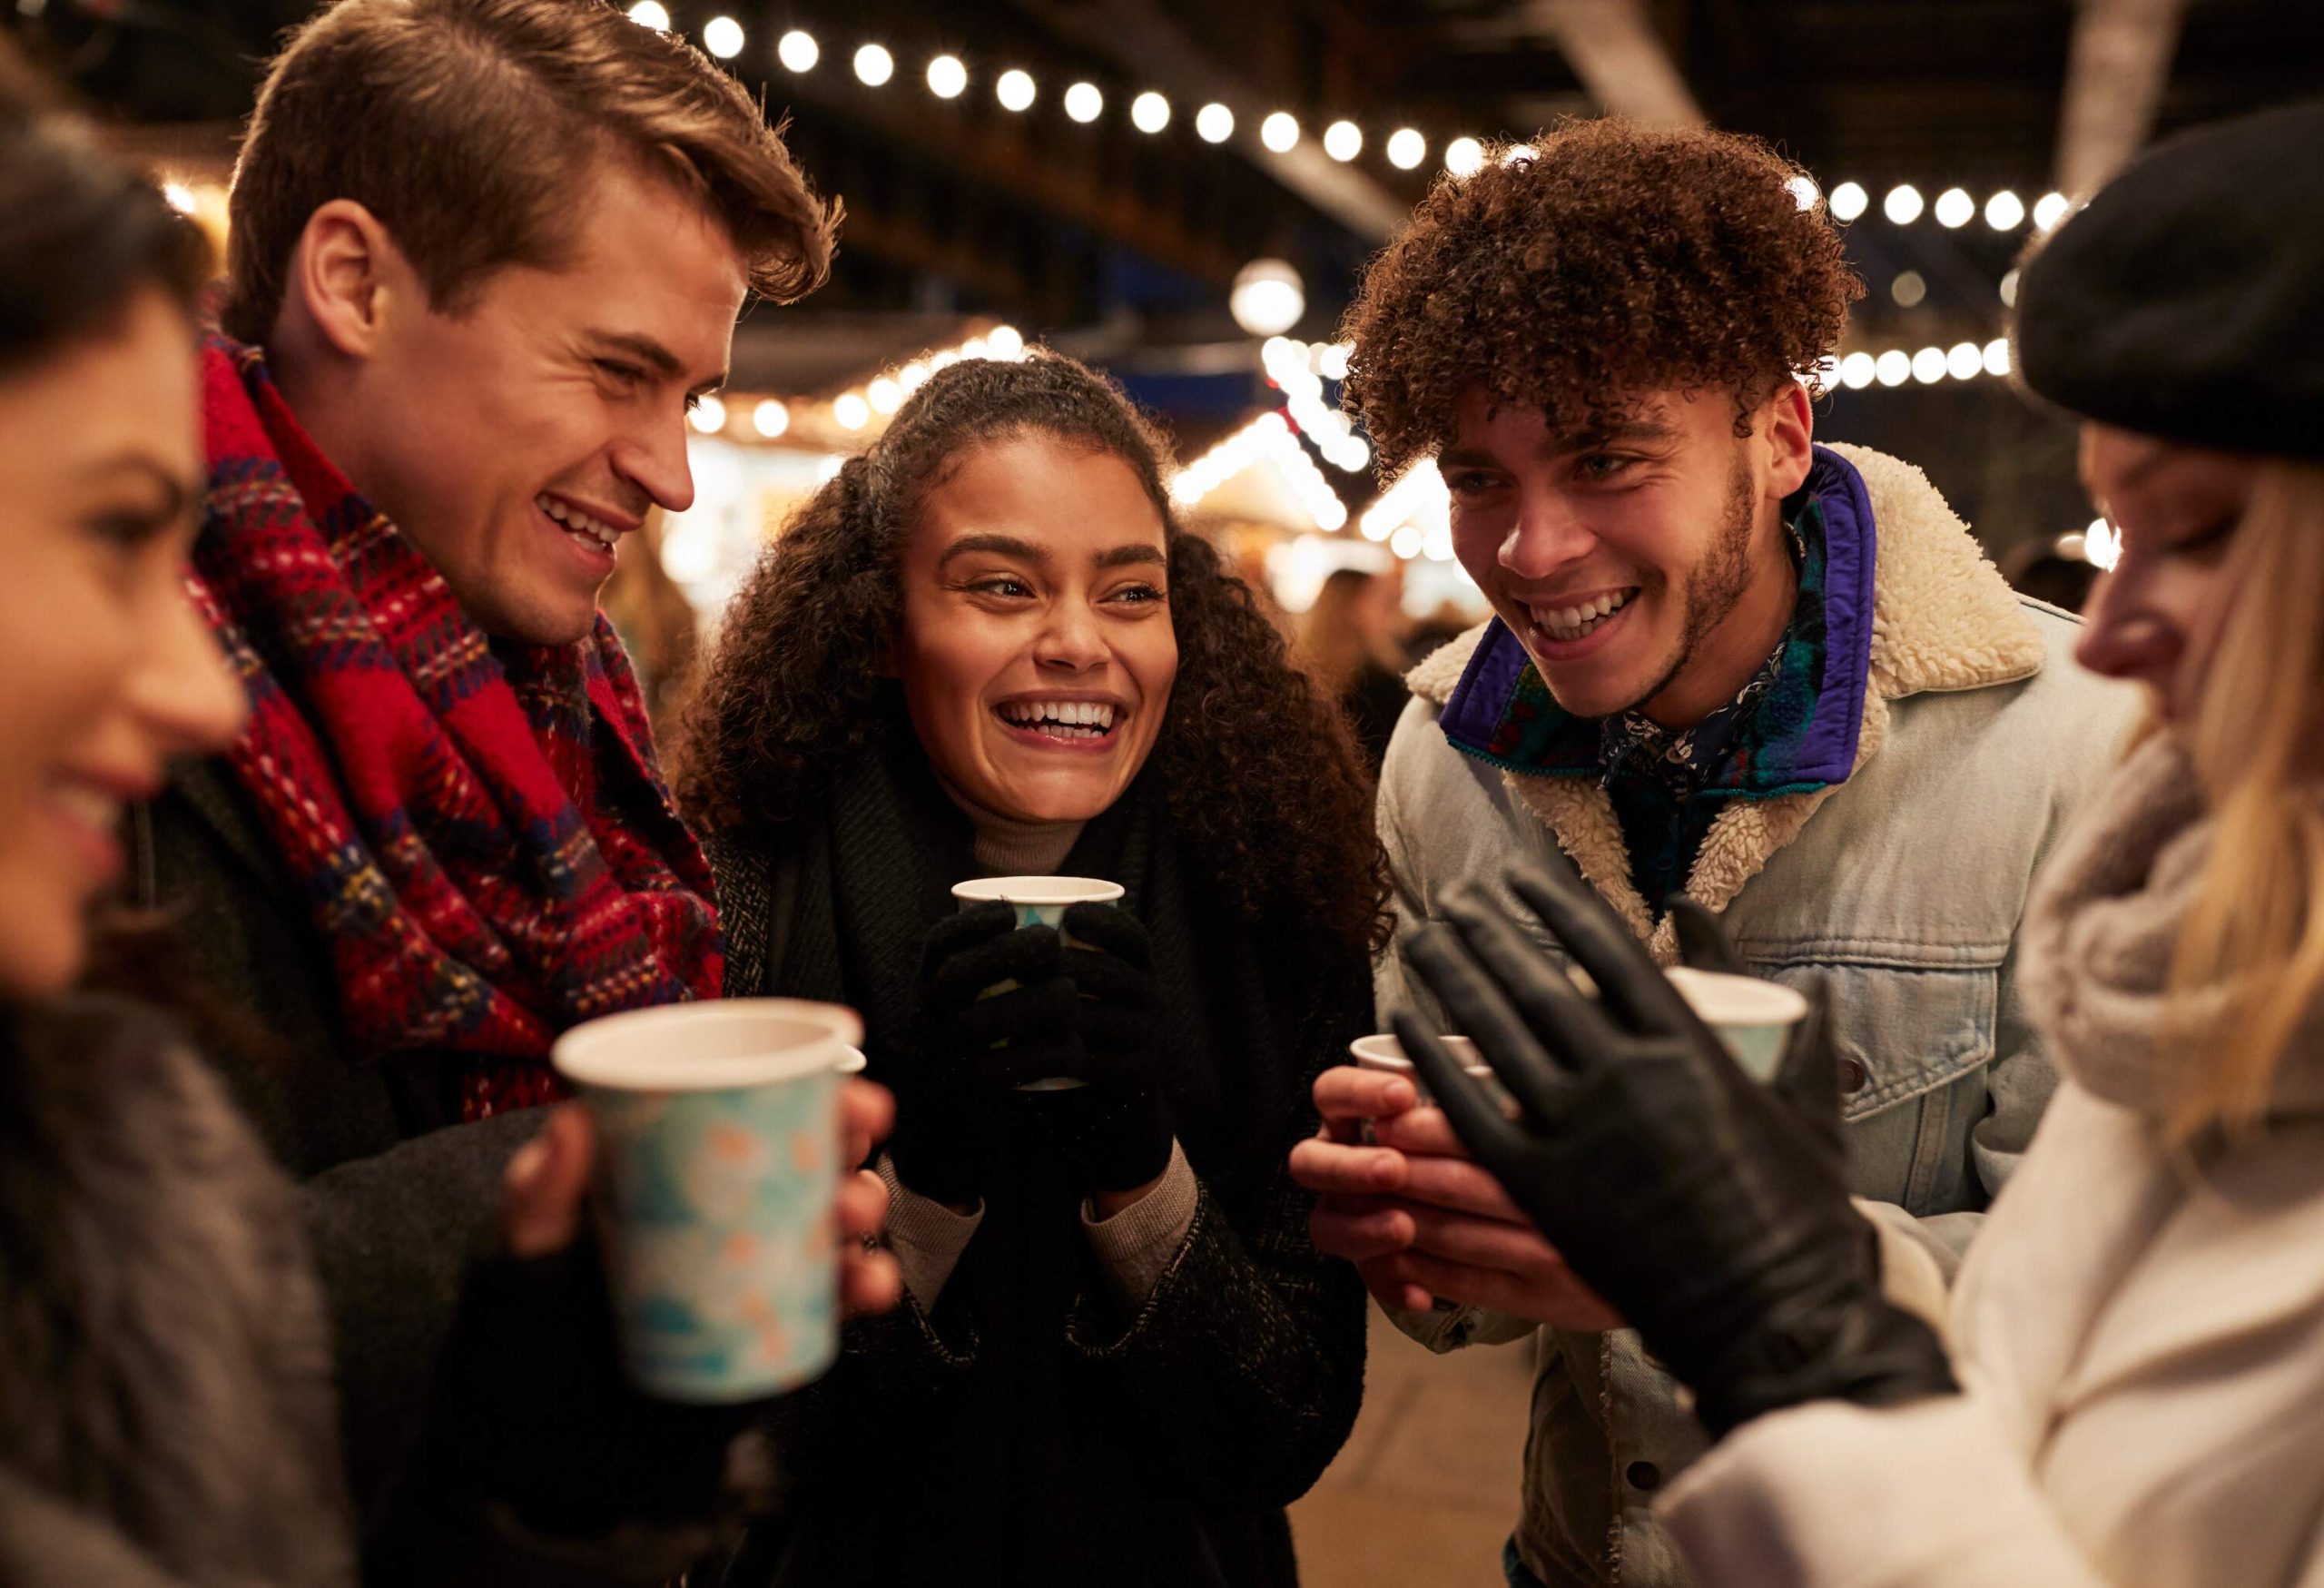 Five friends in warm clothing face each other while smiling and holding their cup of drinks.